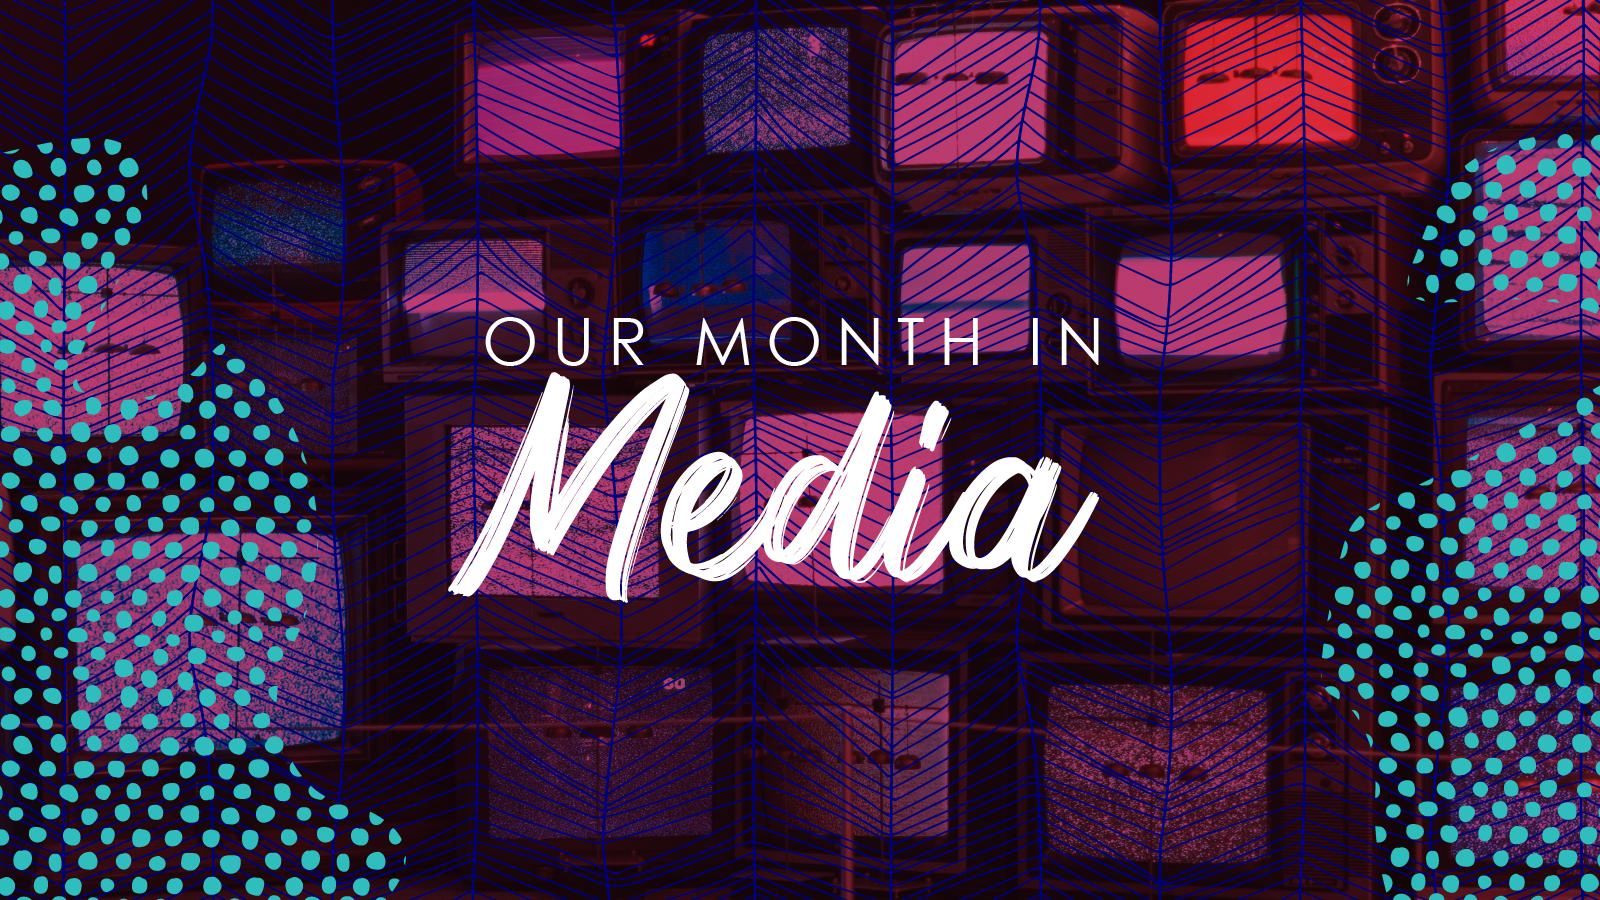 Our Month in Media